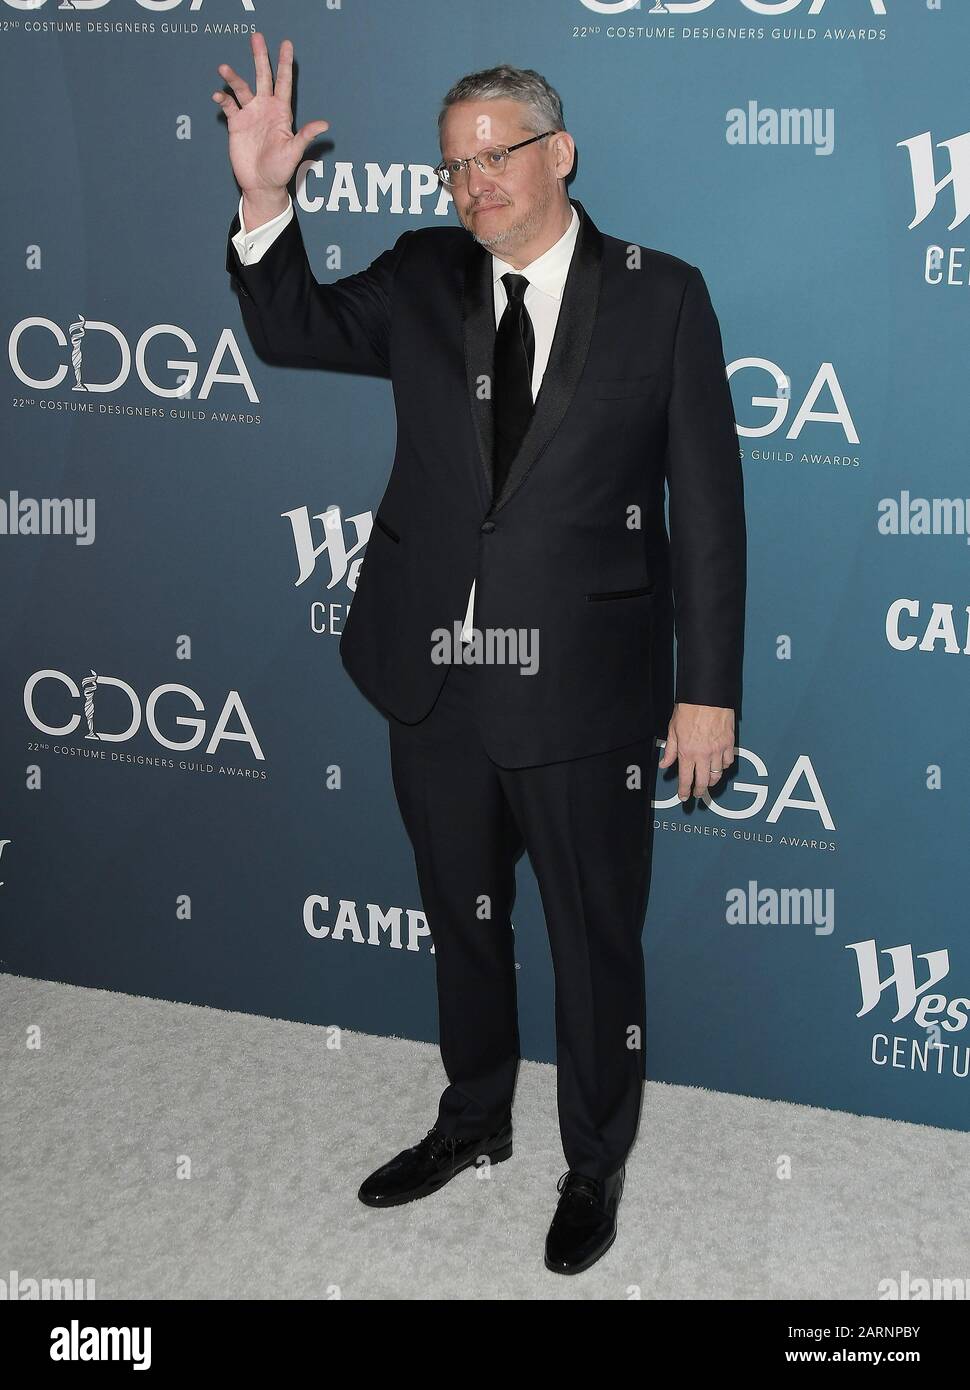 Adam McKay arrives at the 22nd Costume Designers Guild Awards held at the Beverly Hilton in Beverly Hills, CA on Tuesday, ?January 28, 2020.  (Photo By Sthanlee B. Mirador/Sipa USA) Stock Photo